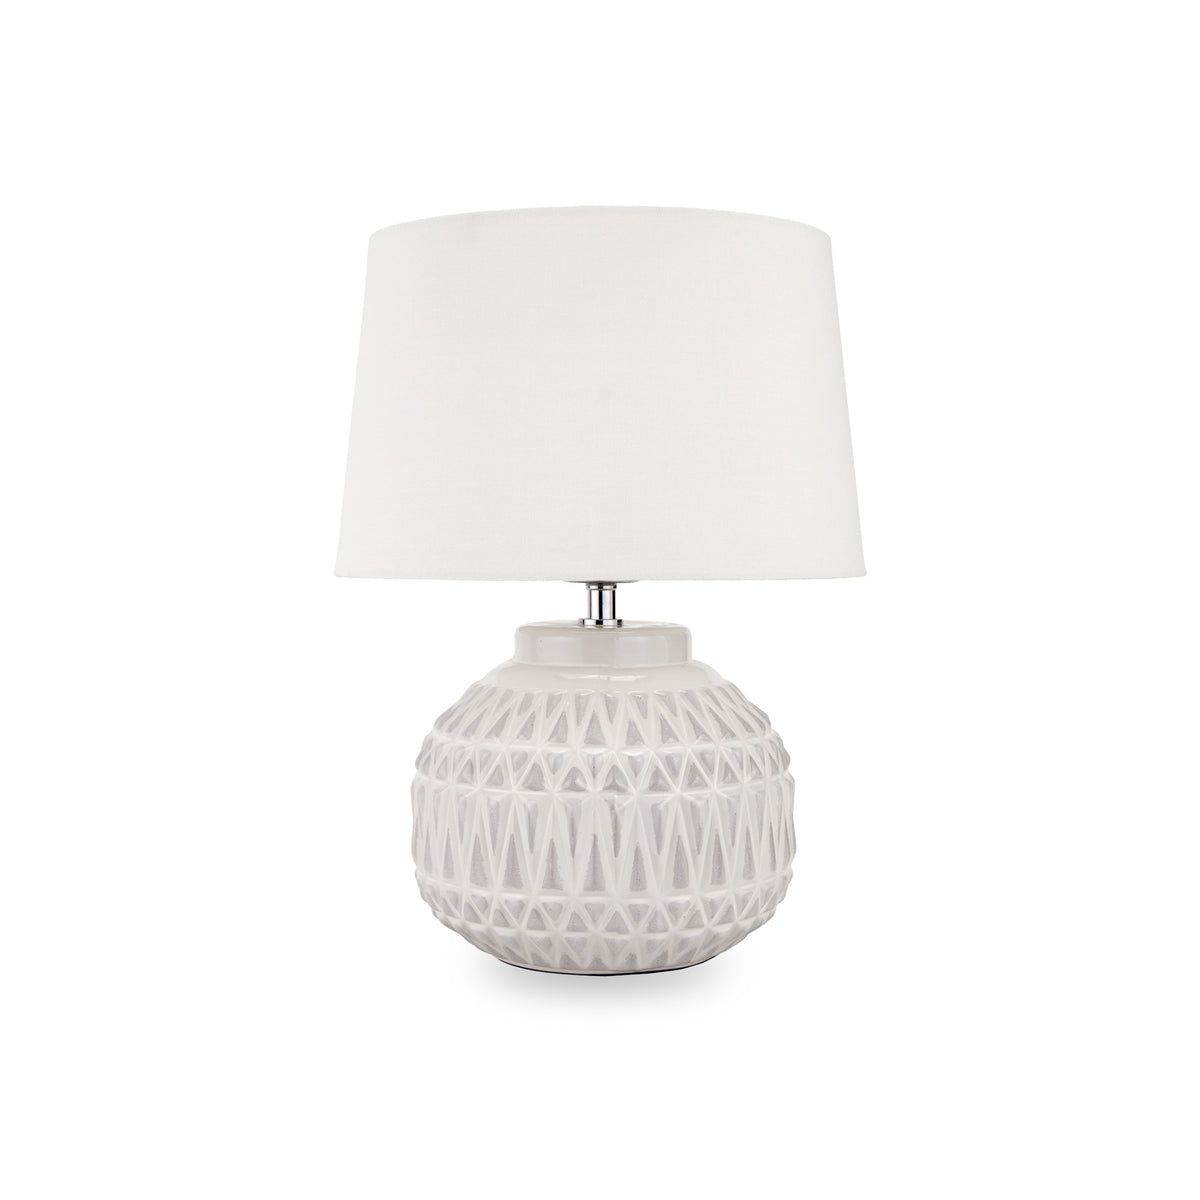 Anneli Warm White Aztec Texture Ceramic Table Lamp from Roseland Furniture